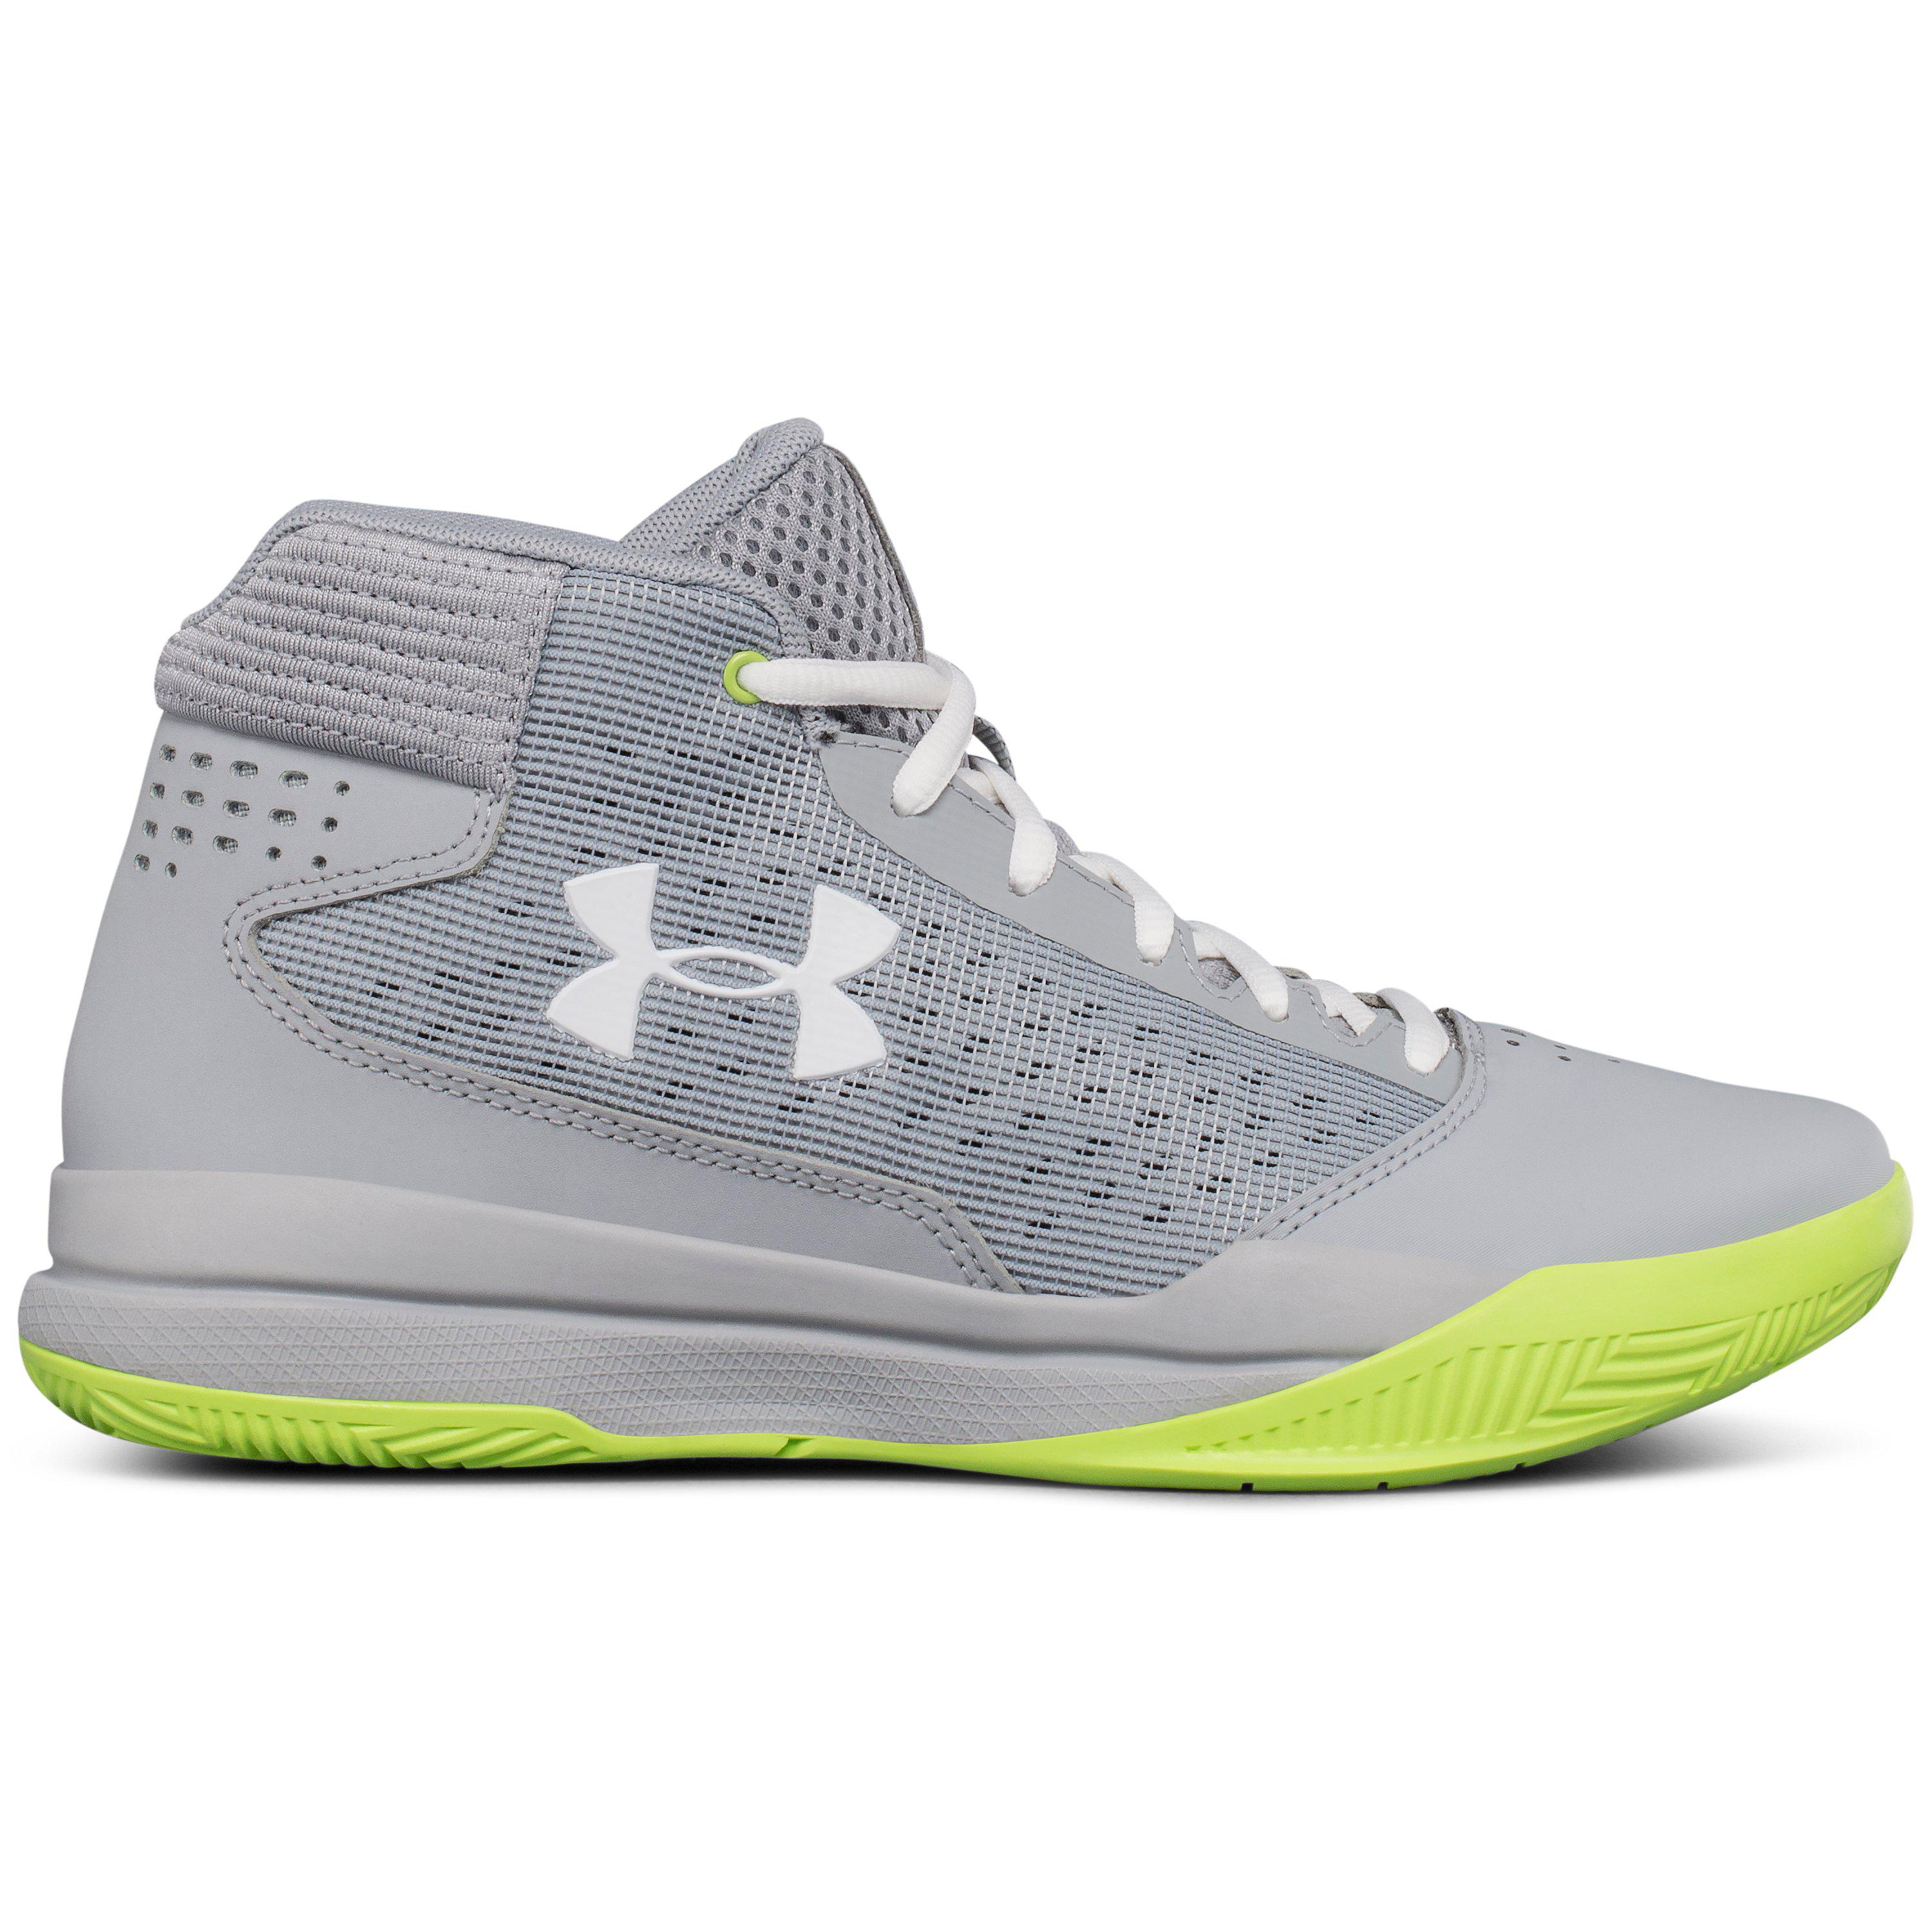 under armour jet women's basketball shoes